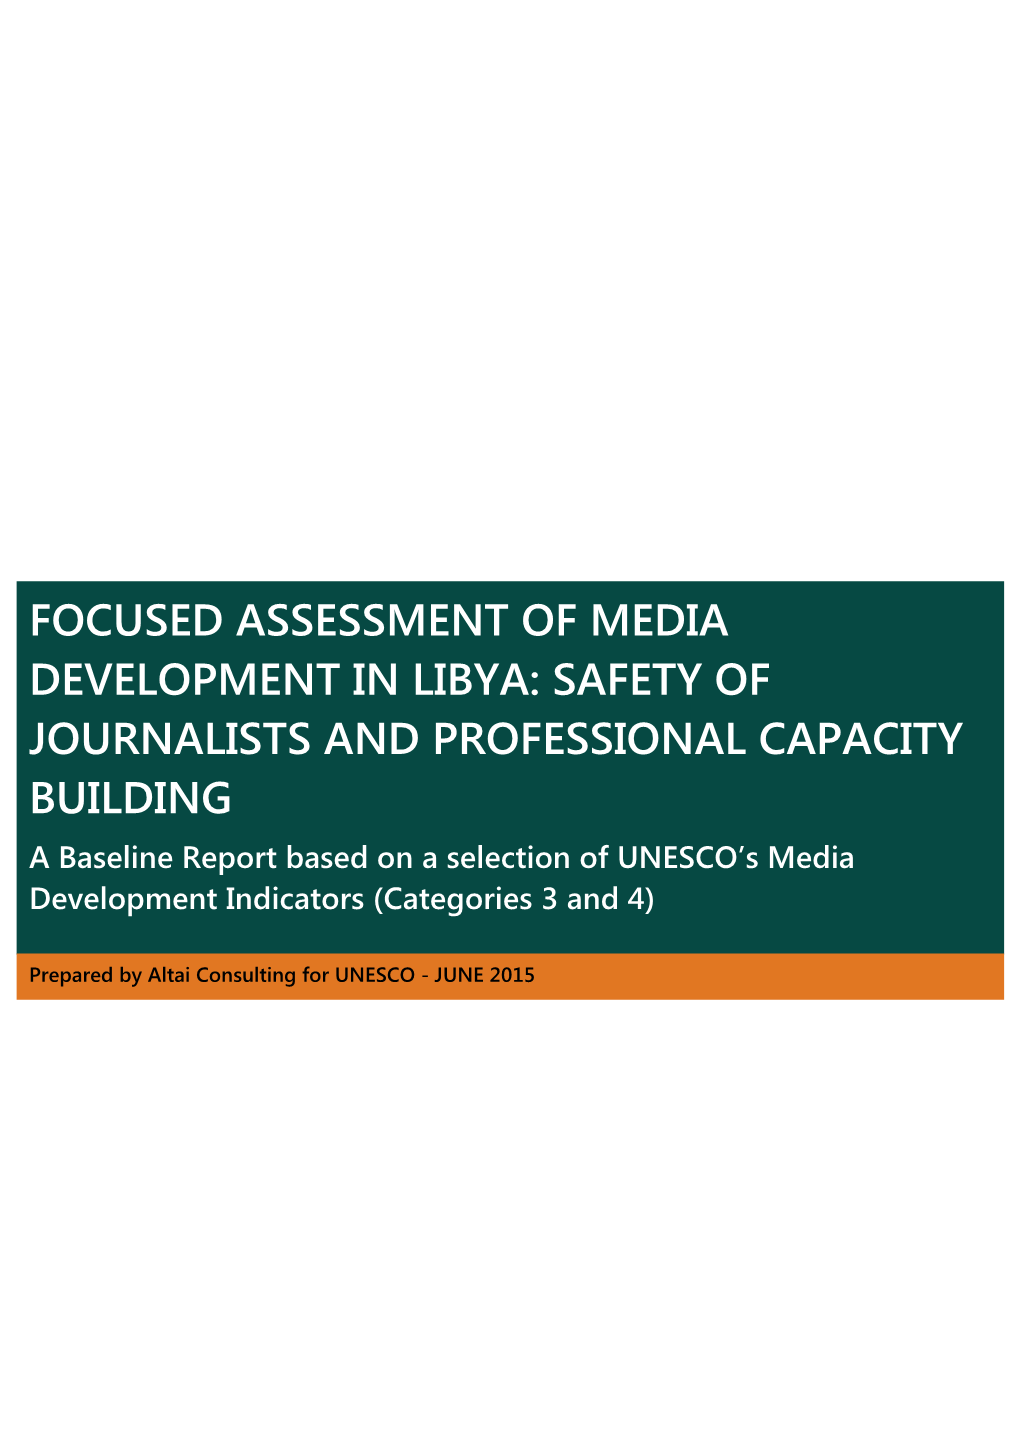 Focused Assessment of Media Development in Libya: Safety of Journalists and Professional Capacity Building